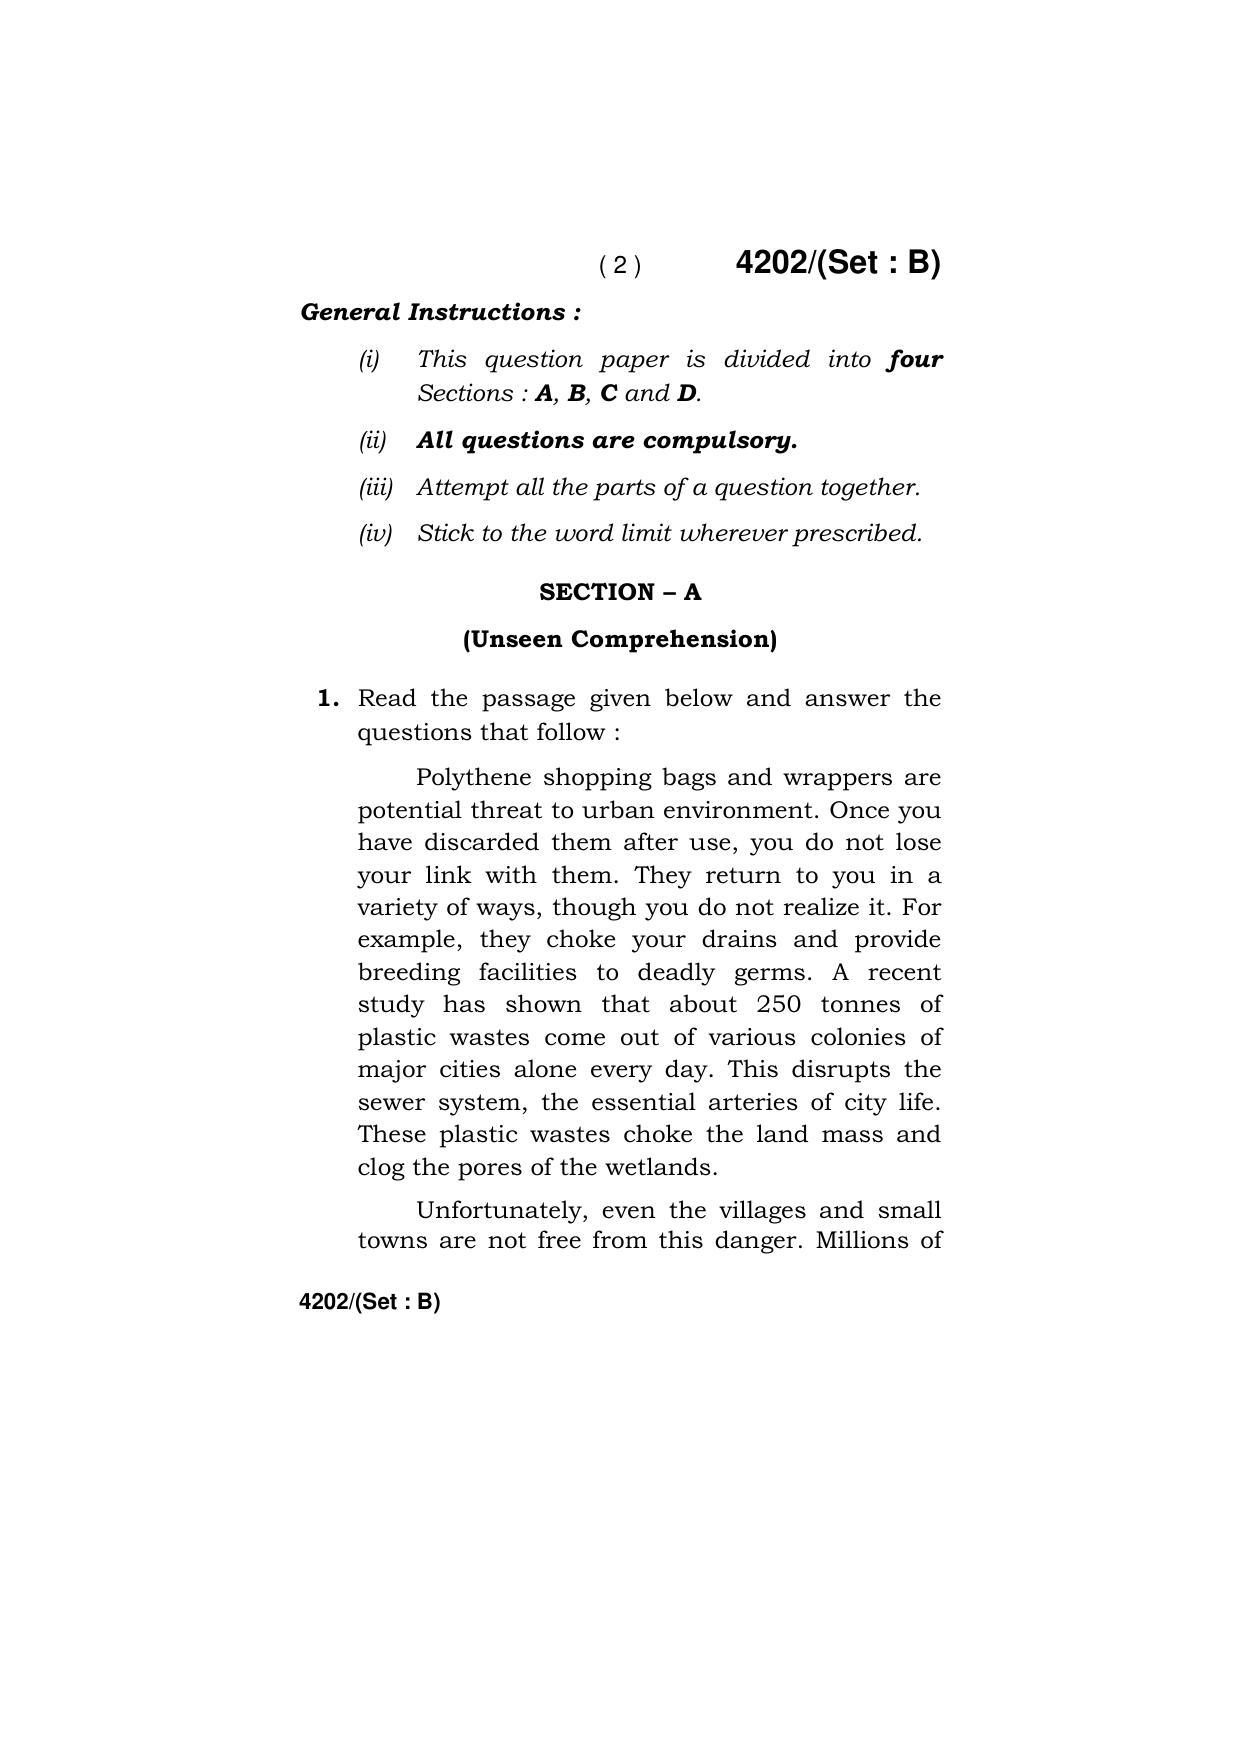 Haryana Board HBSE Class 10 English (All Set) 2019 Question Paper - Page 18